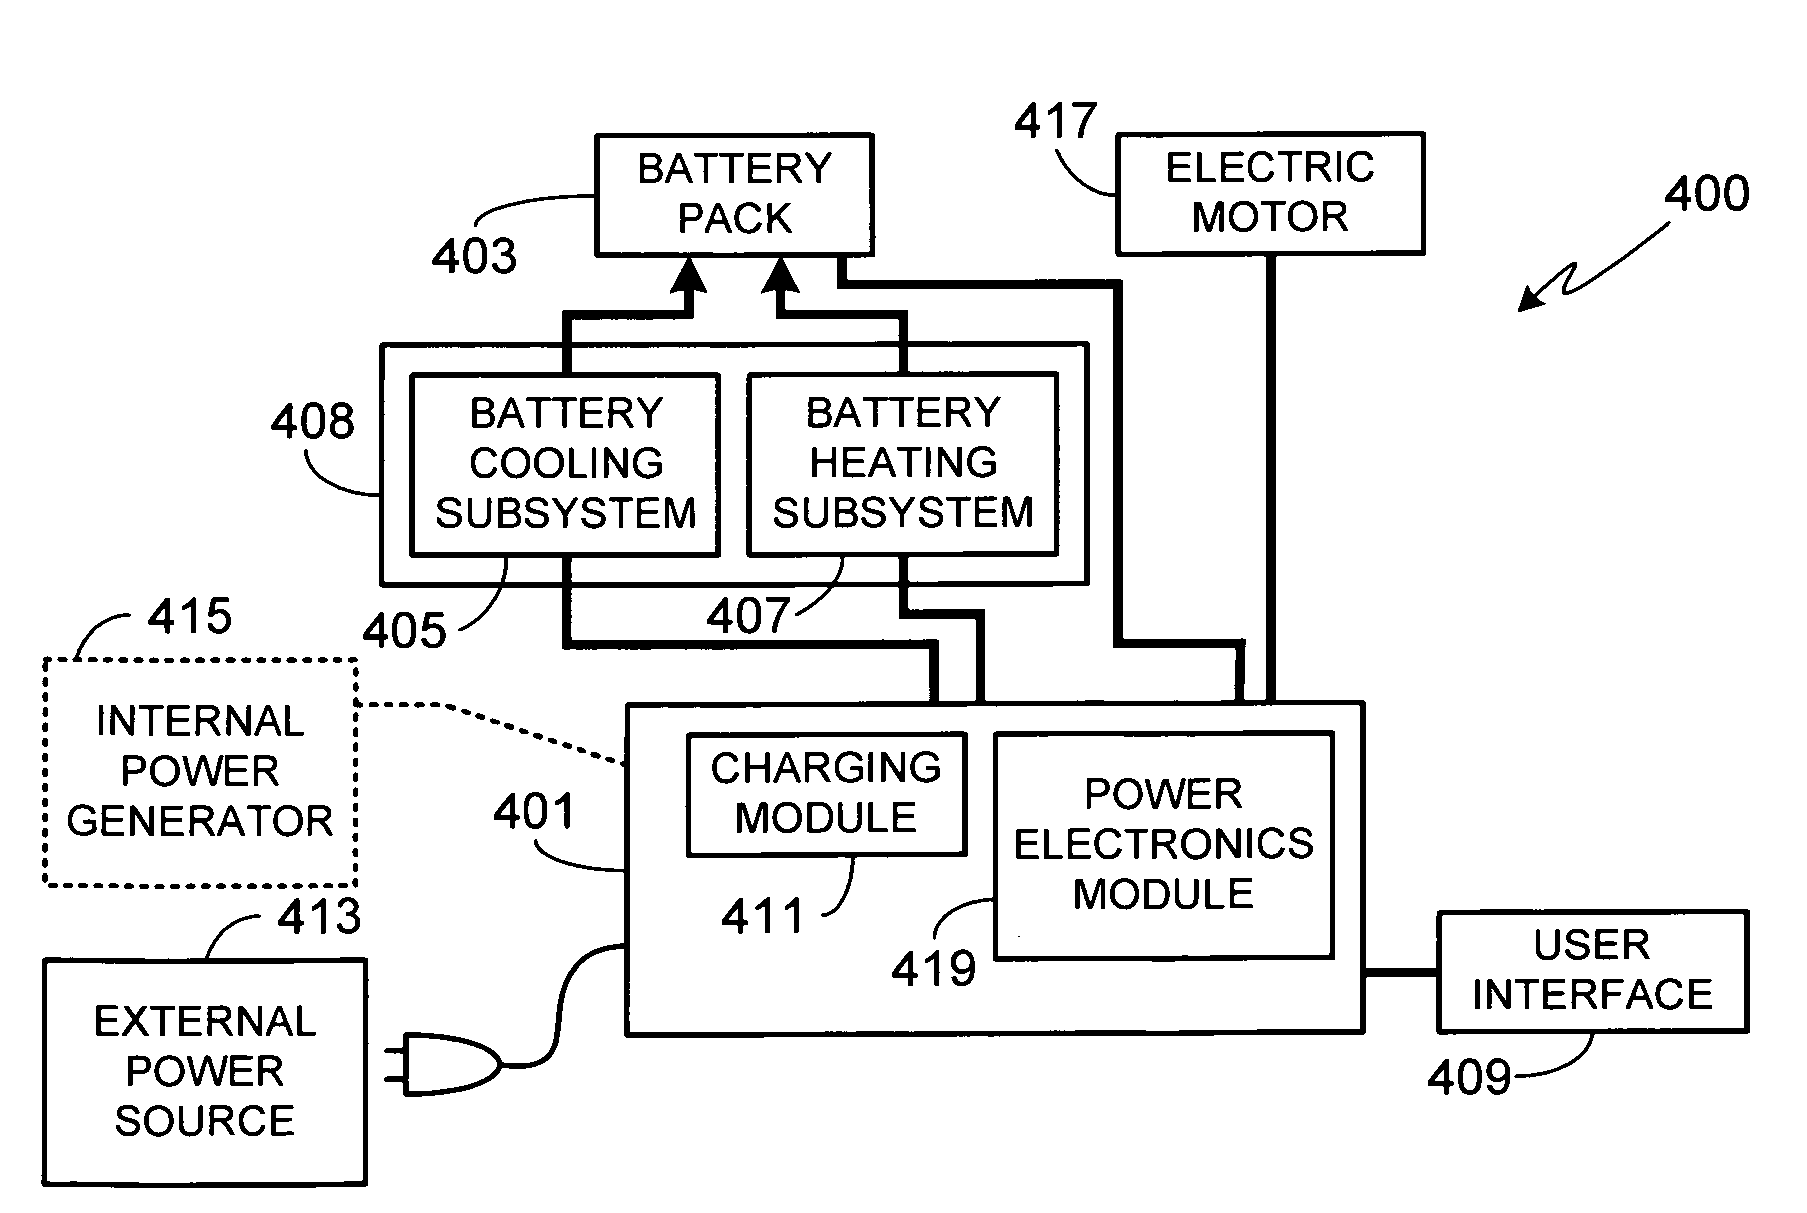 Multi-mode charging system for an electric vehicle